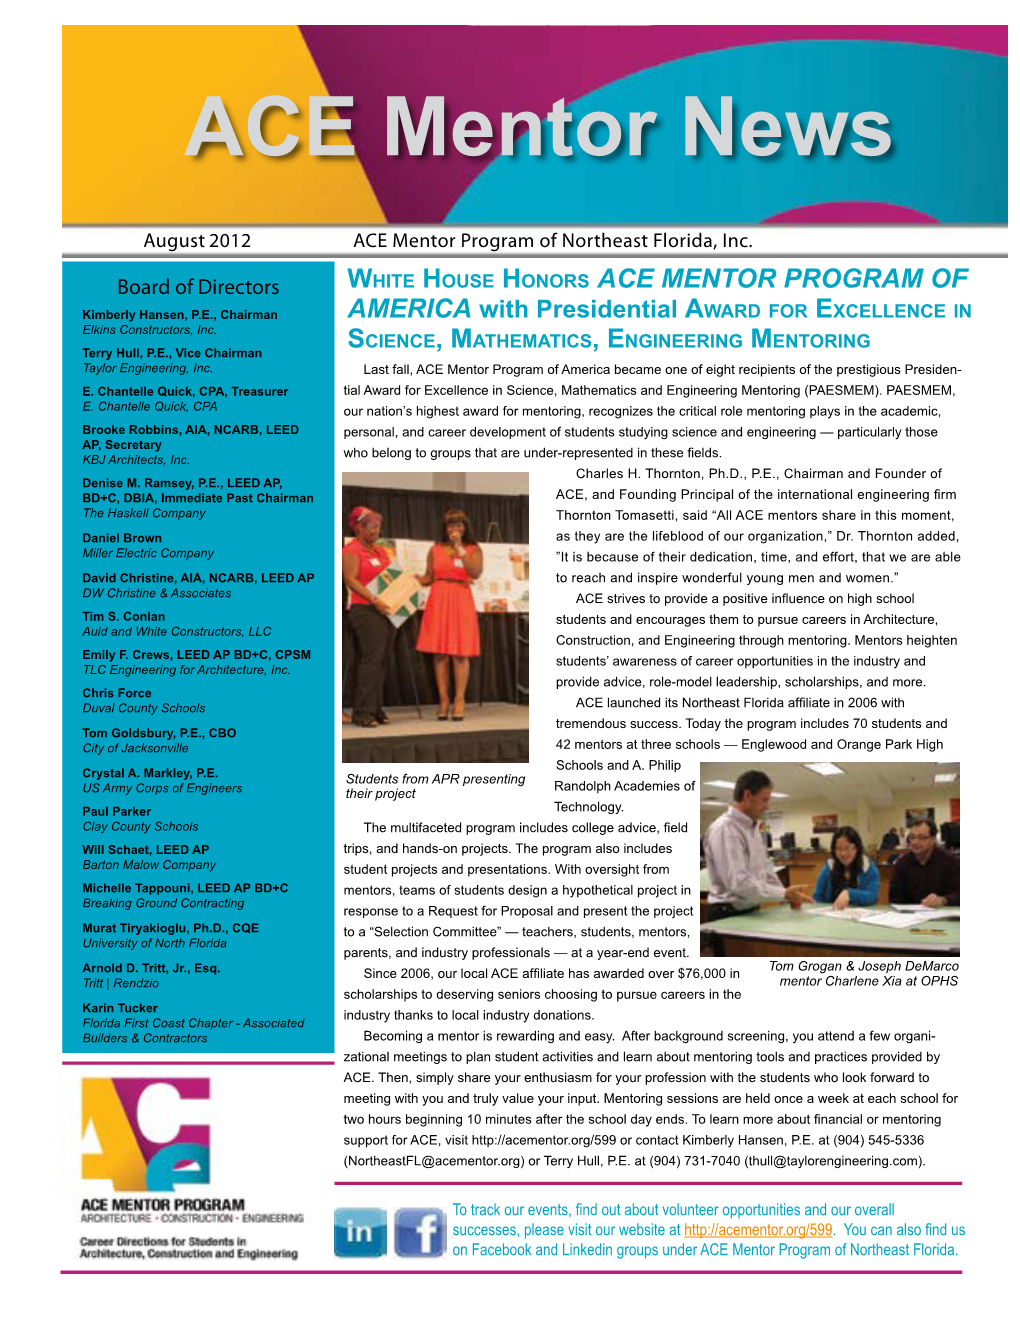 View Our August 2012 Newsletter